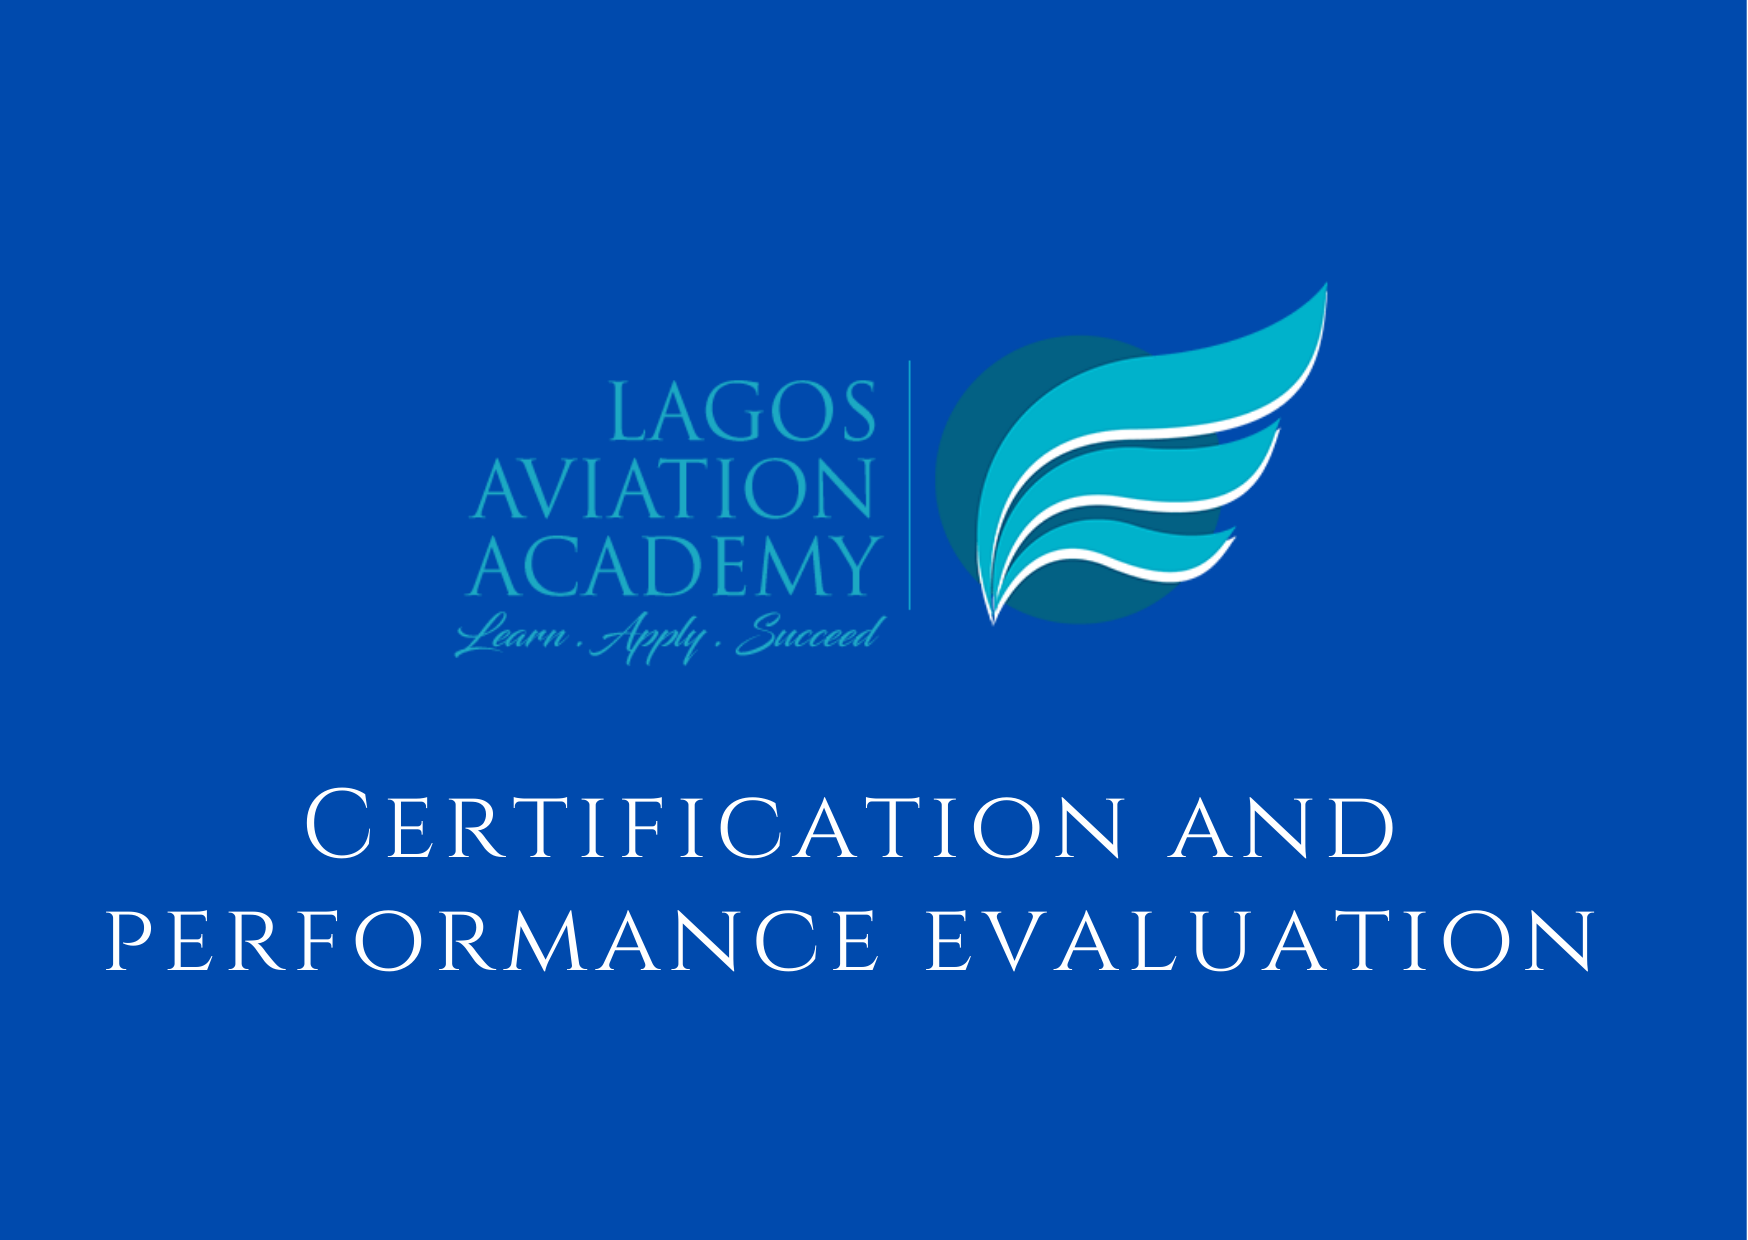 Certification and Performance Evaluation